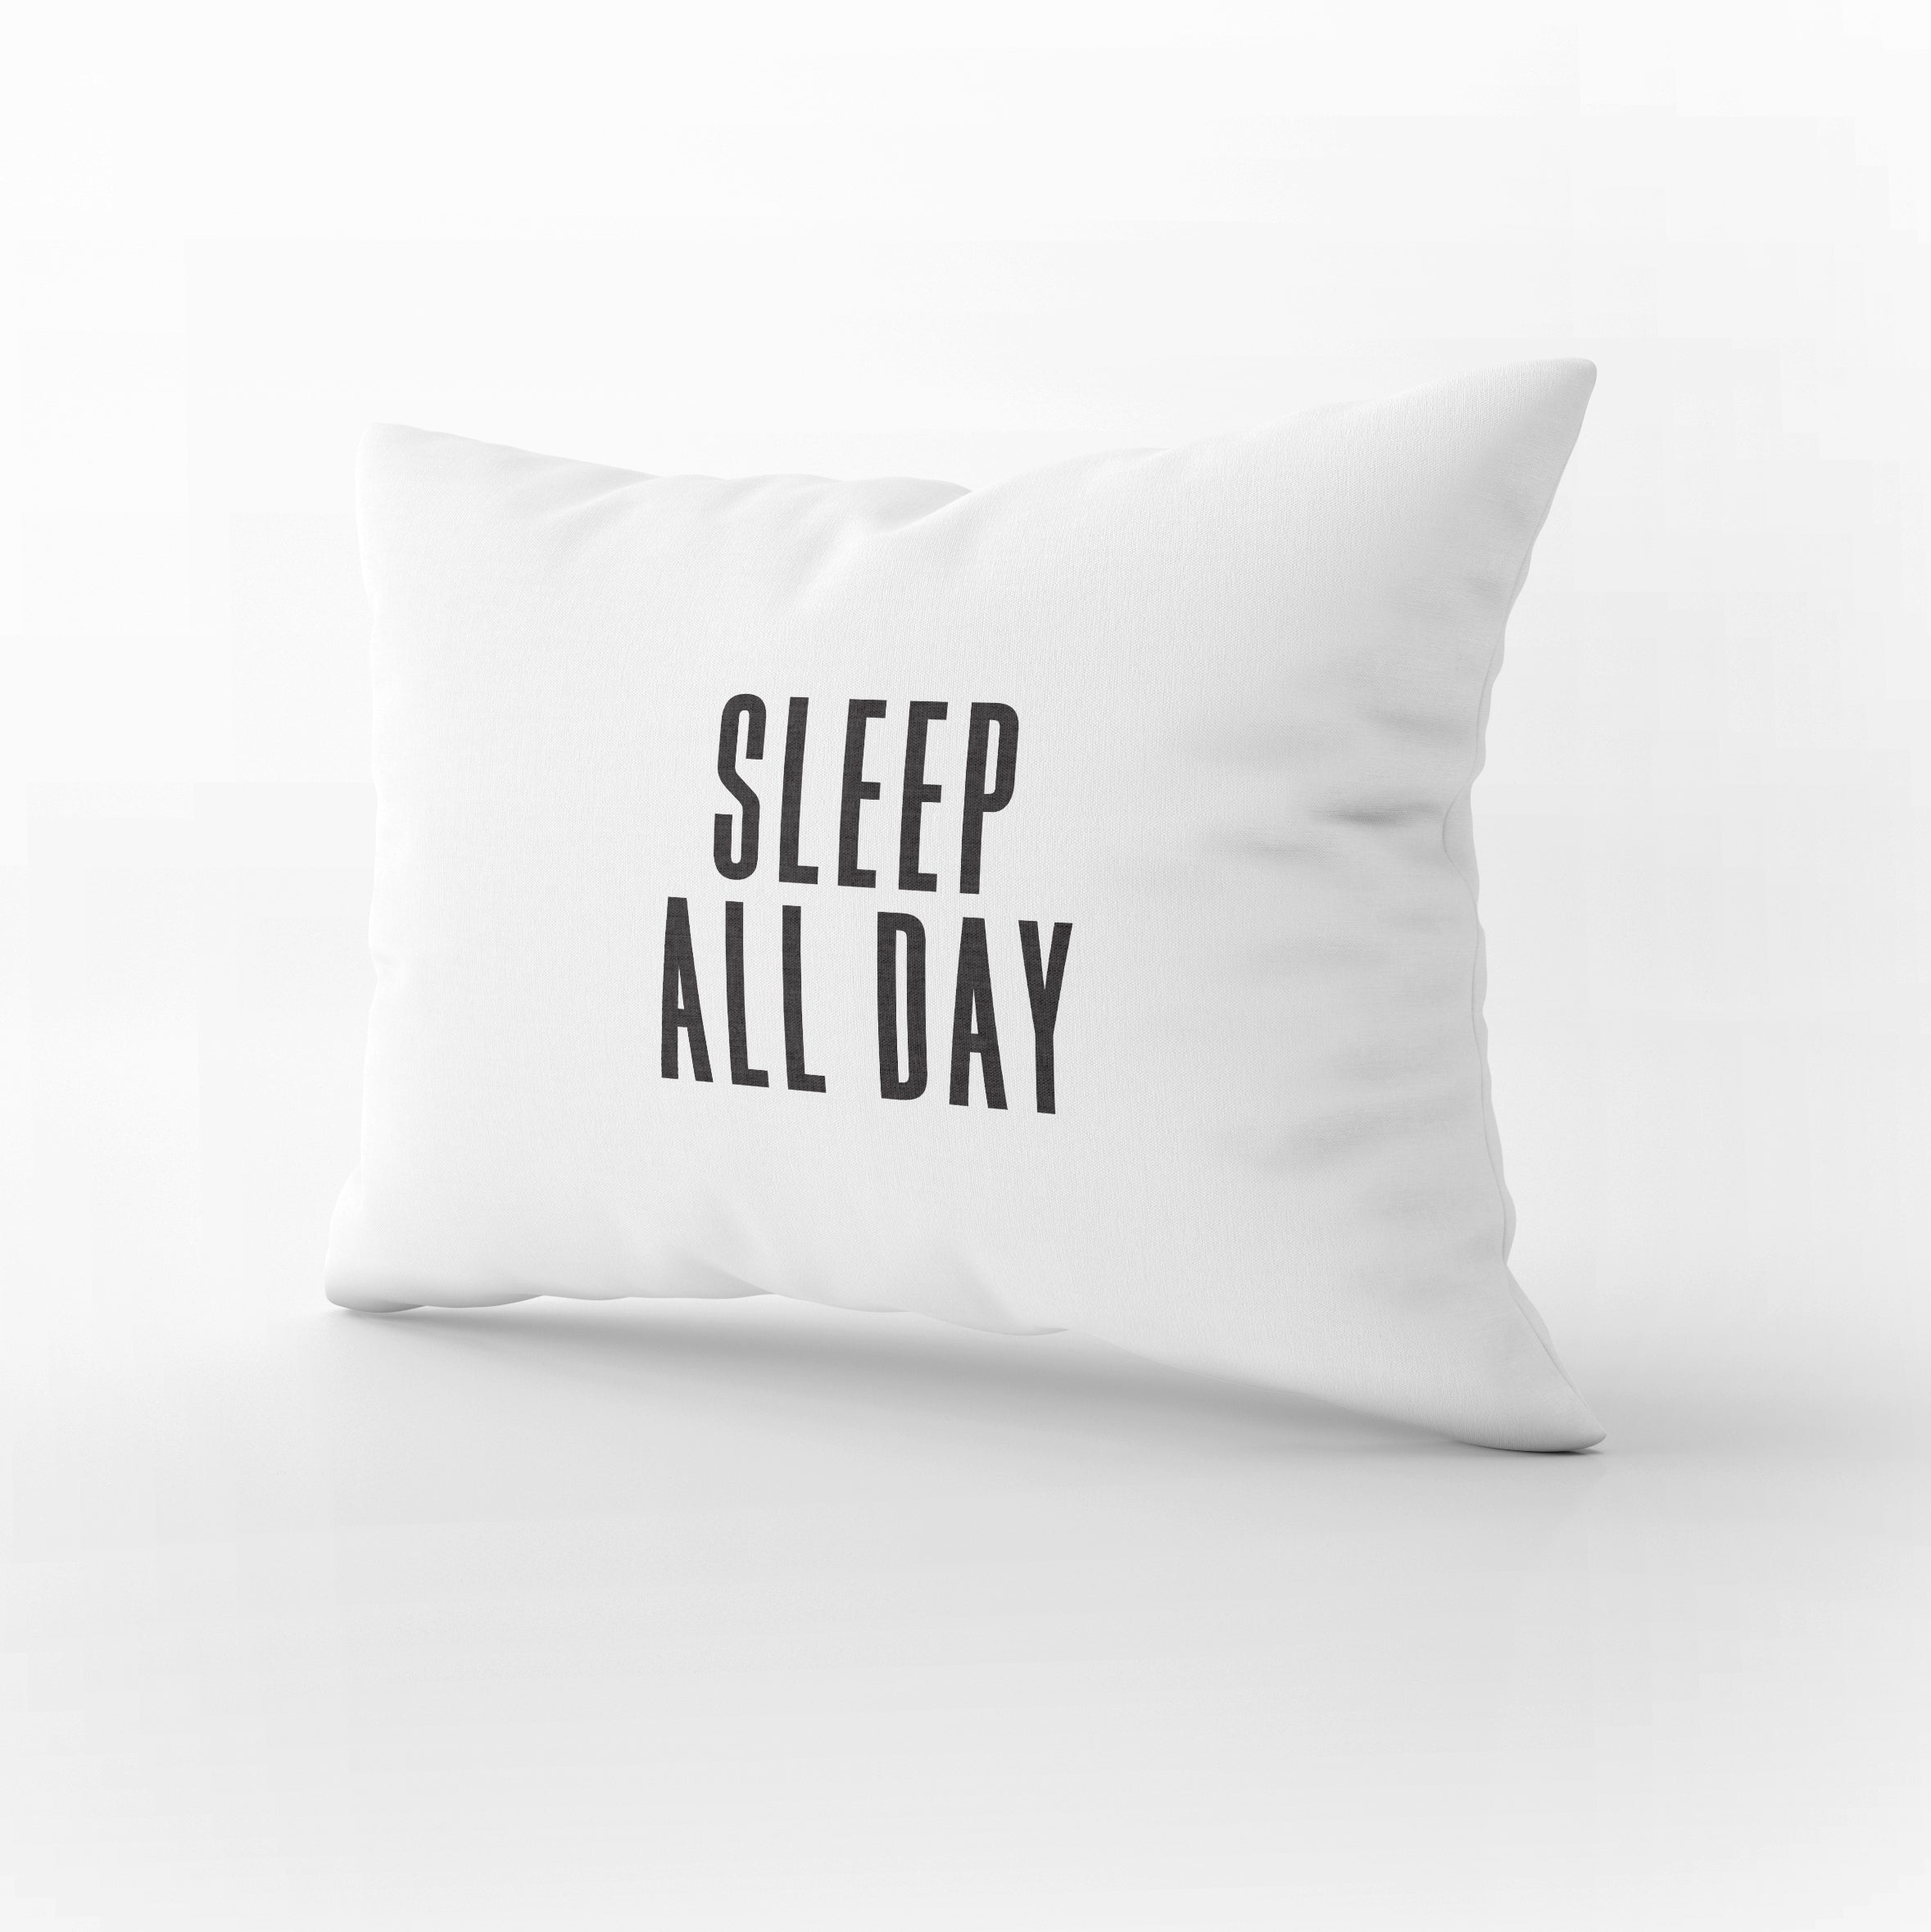 PS04- DANCE ALL NIGHT / SLEEP ALL DAY PILLOW CASES - Shawshank Clothing 